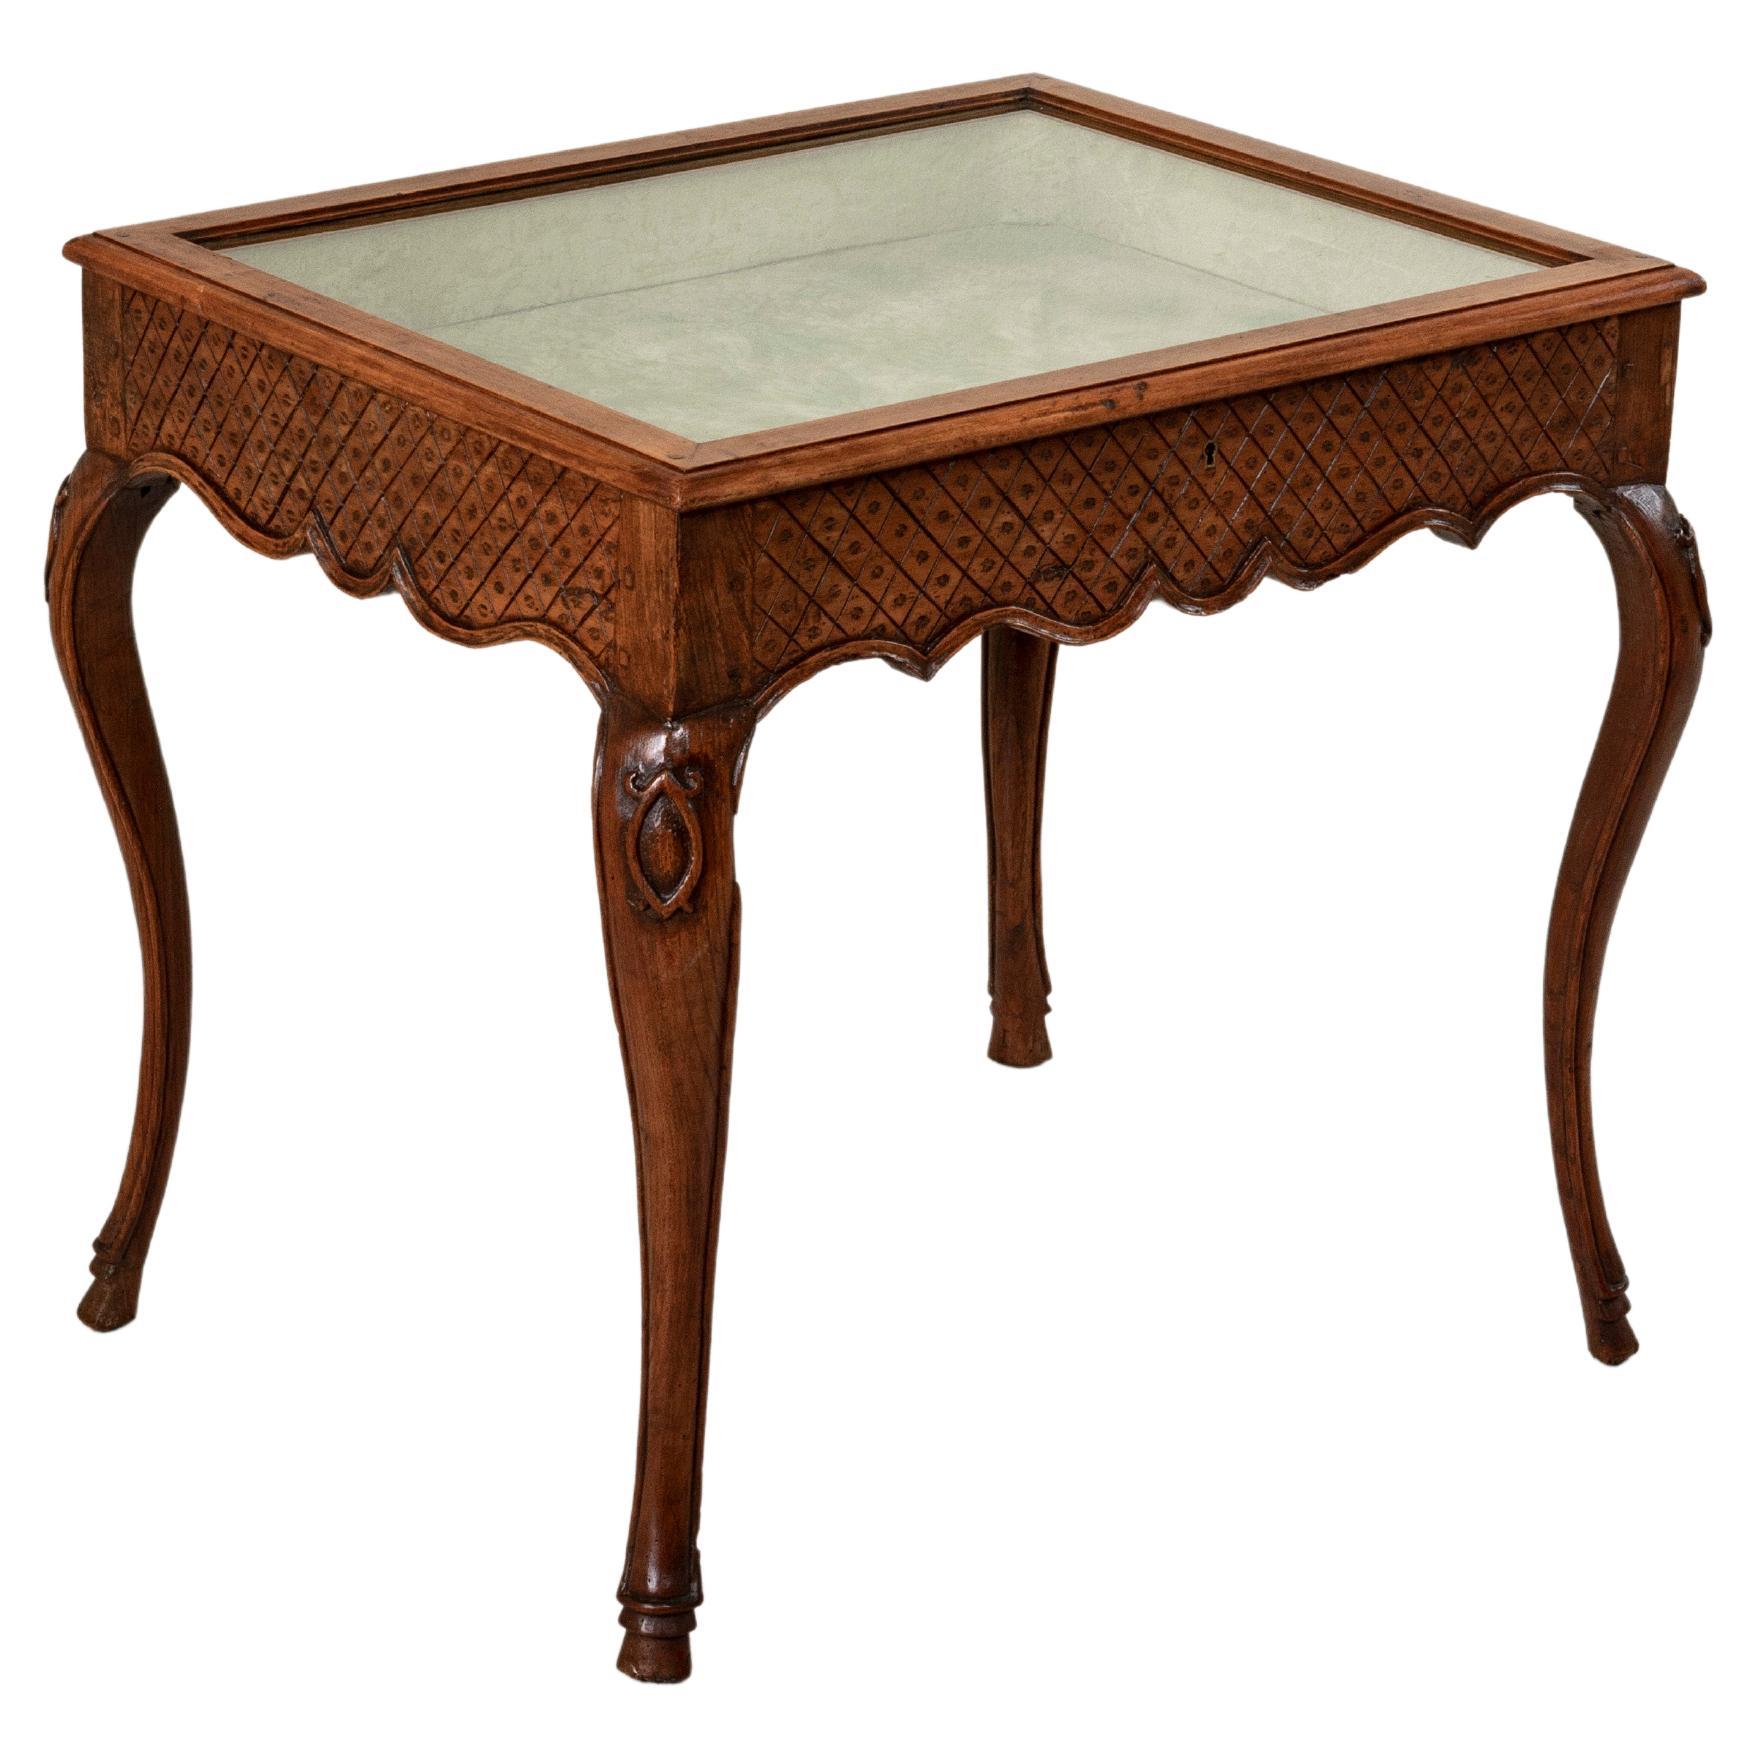 Late 19th Century French Regency Style Hand Carved Walnut Display Table, Vitrine